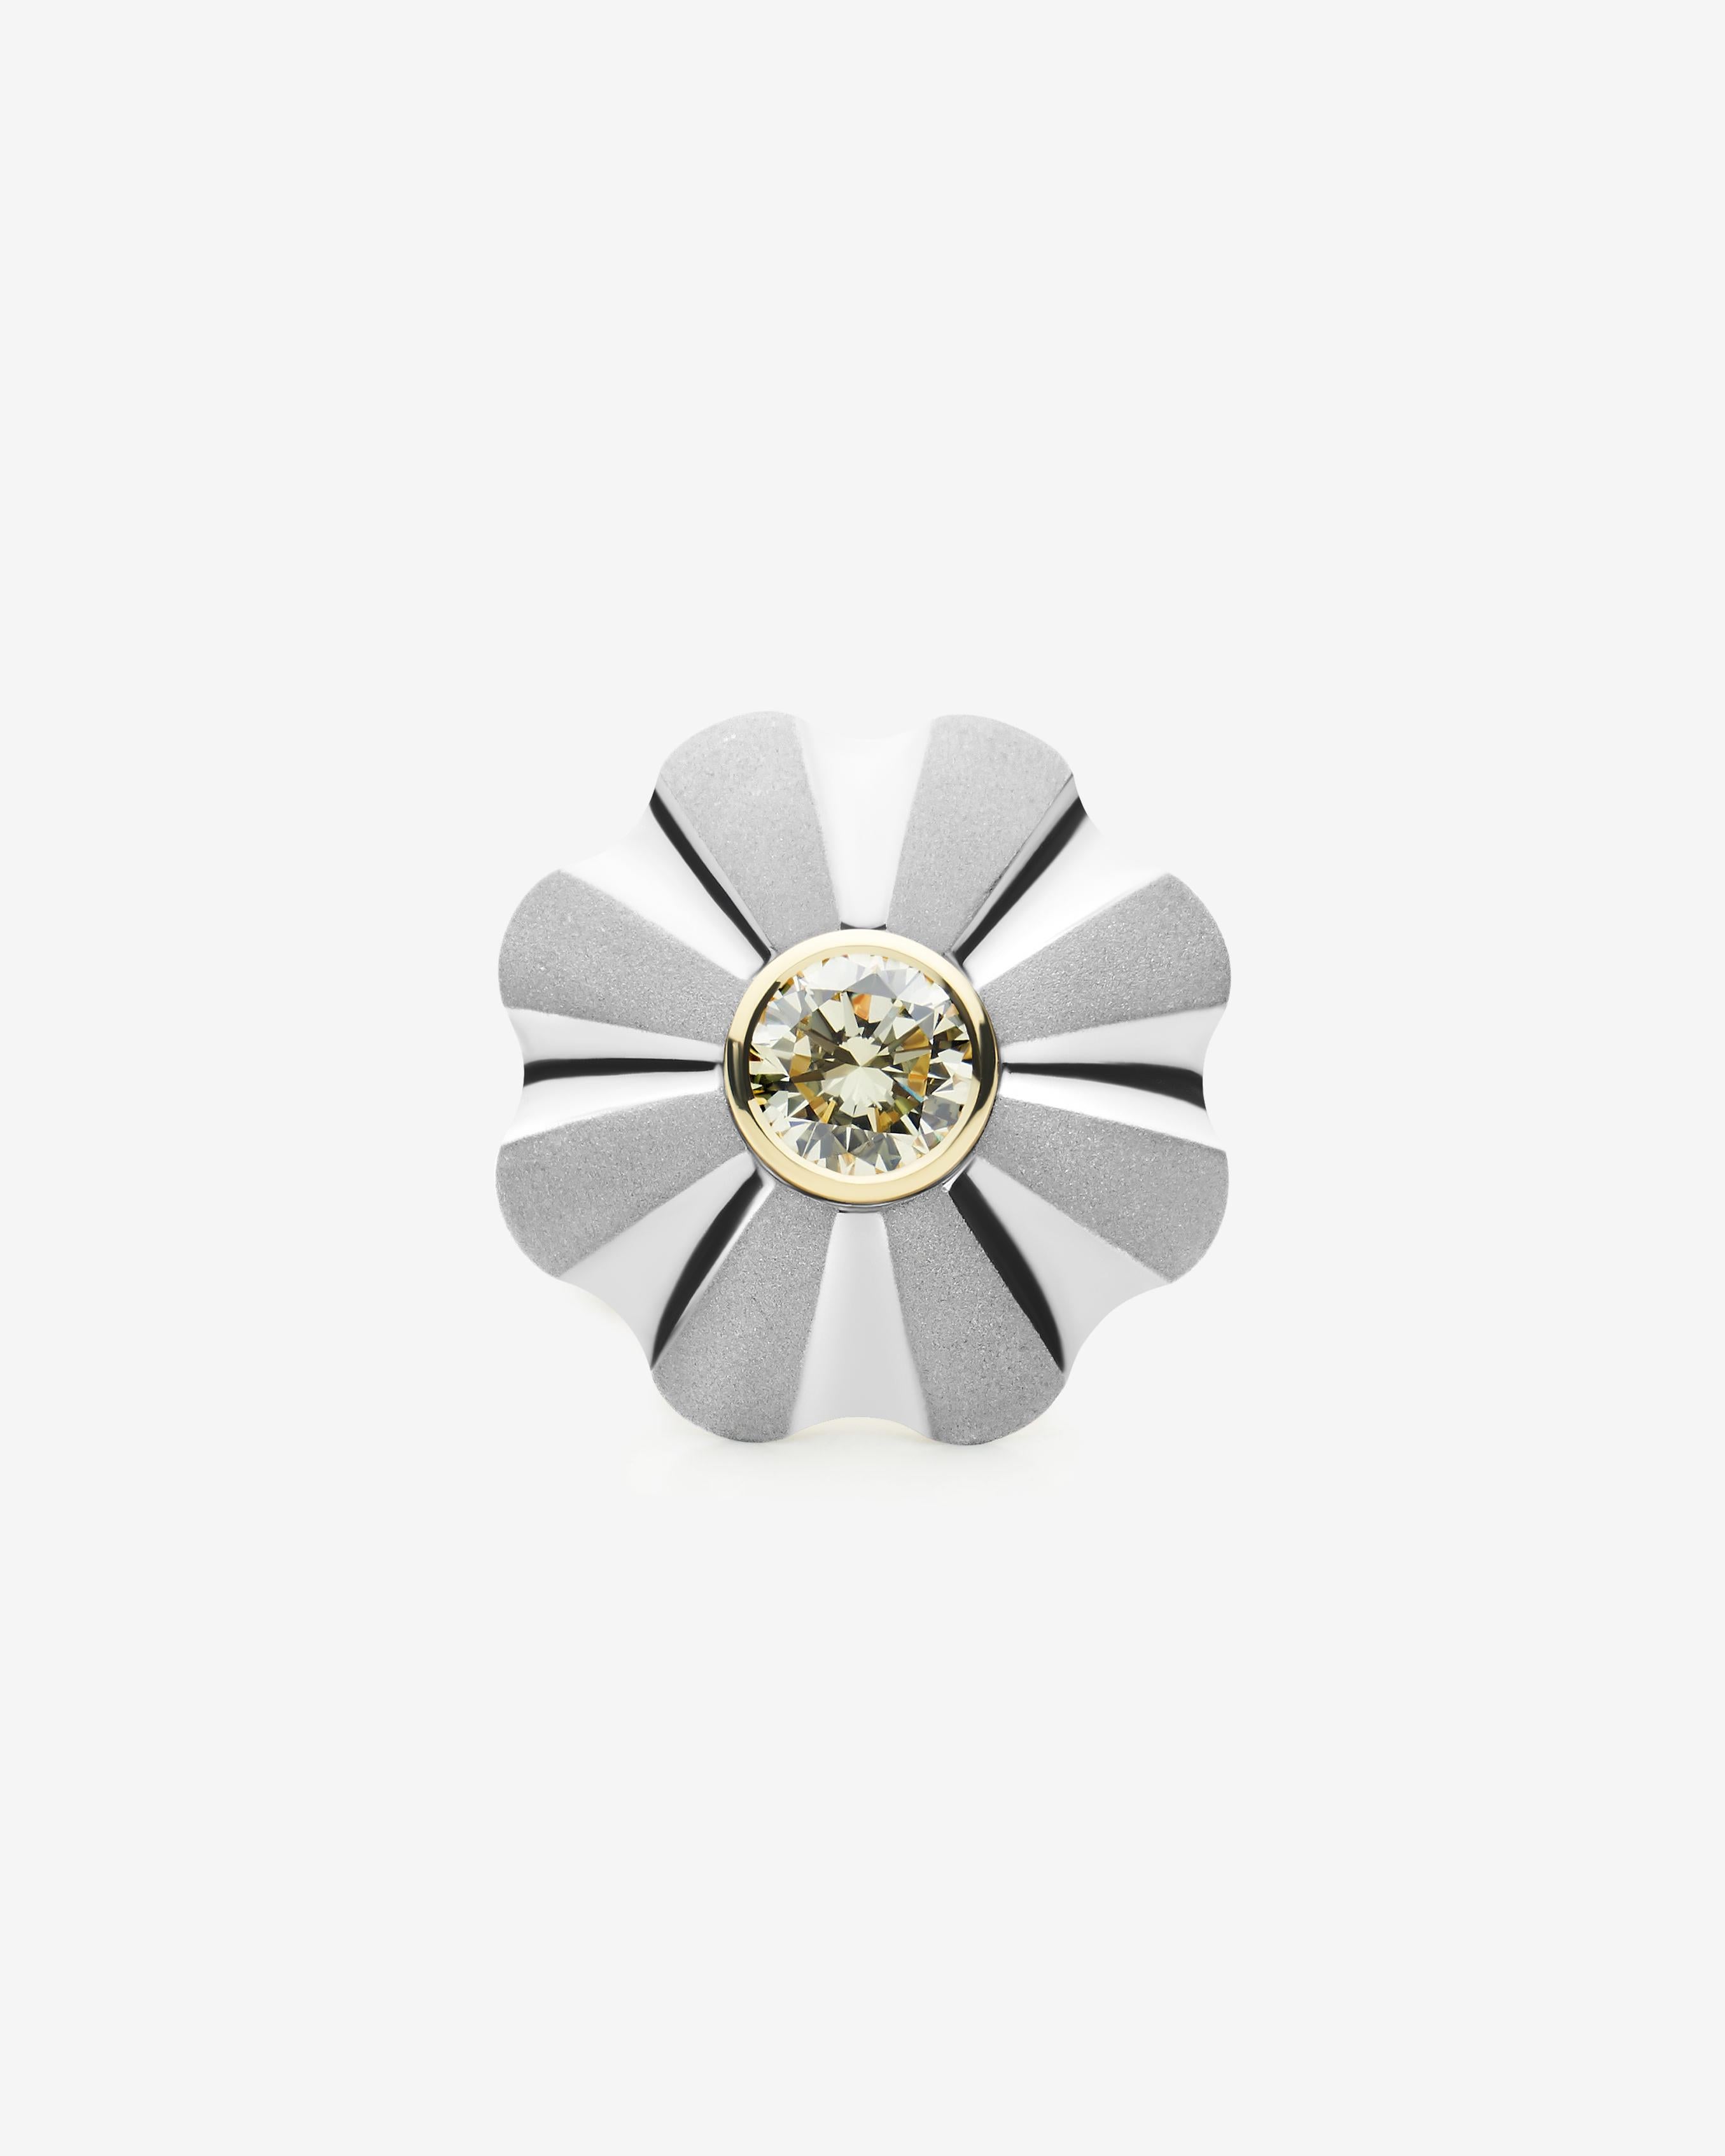 For Sale:  18k Yellow Gold and Platinum Cocktail Ring with 1.08 Carat Fancy Yellow Diamond 2